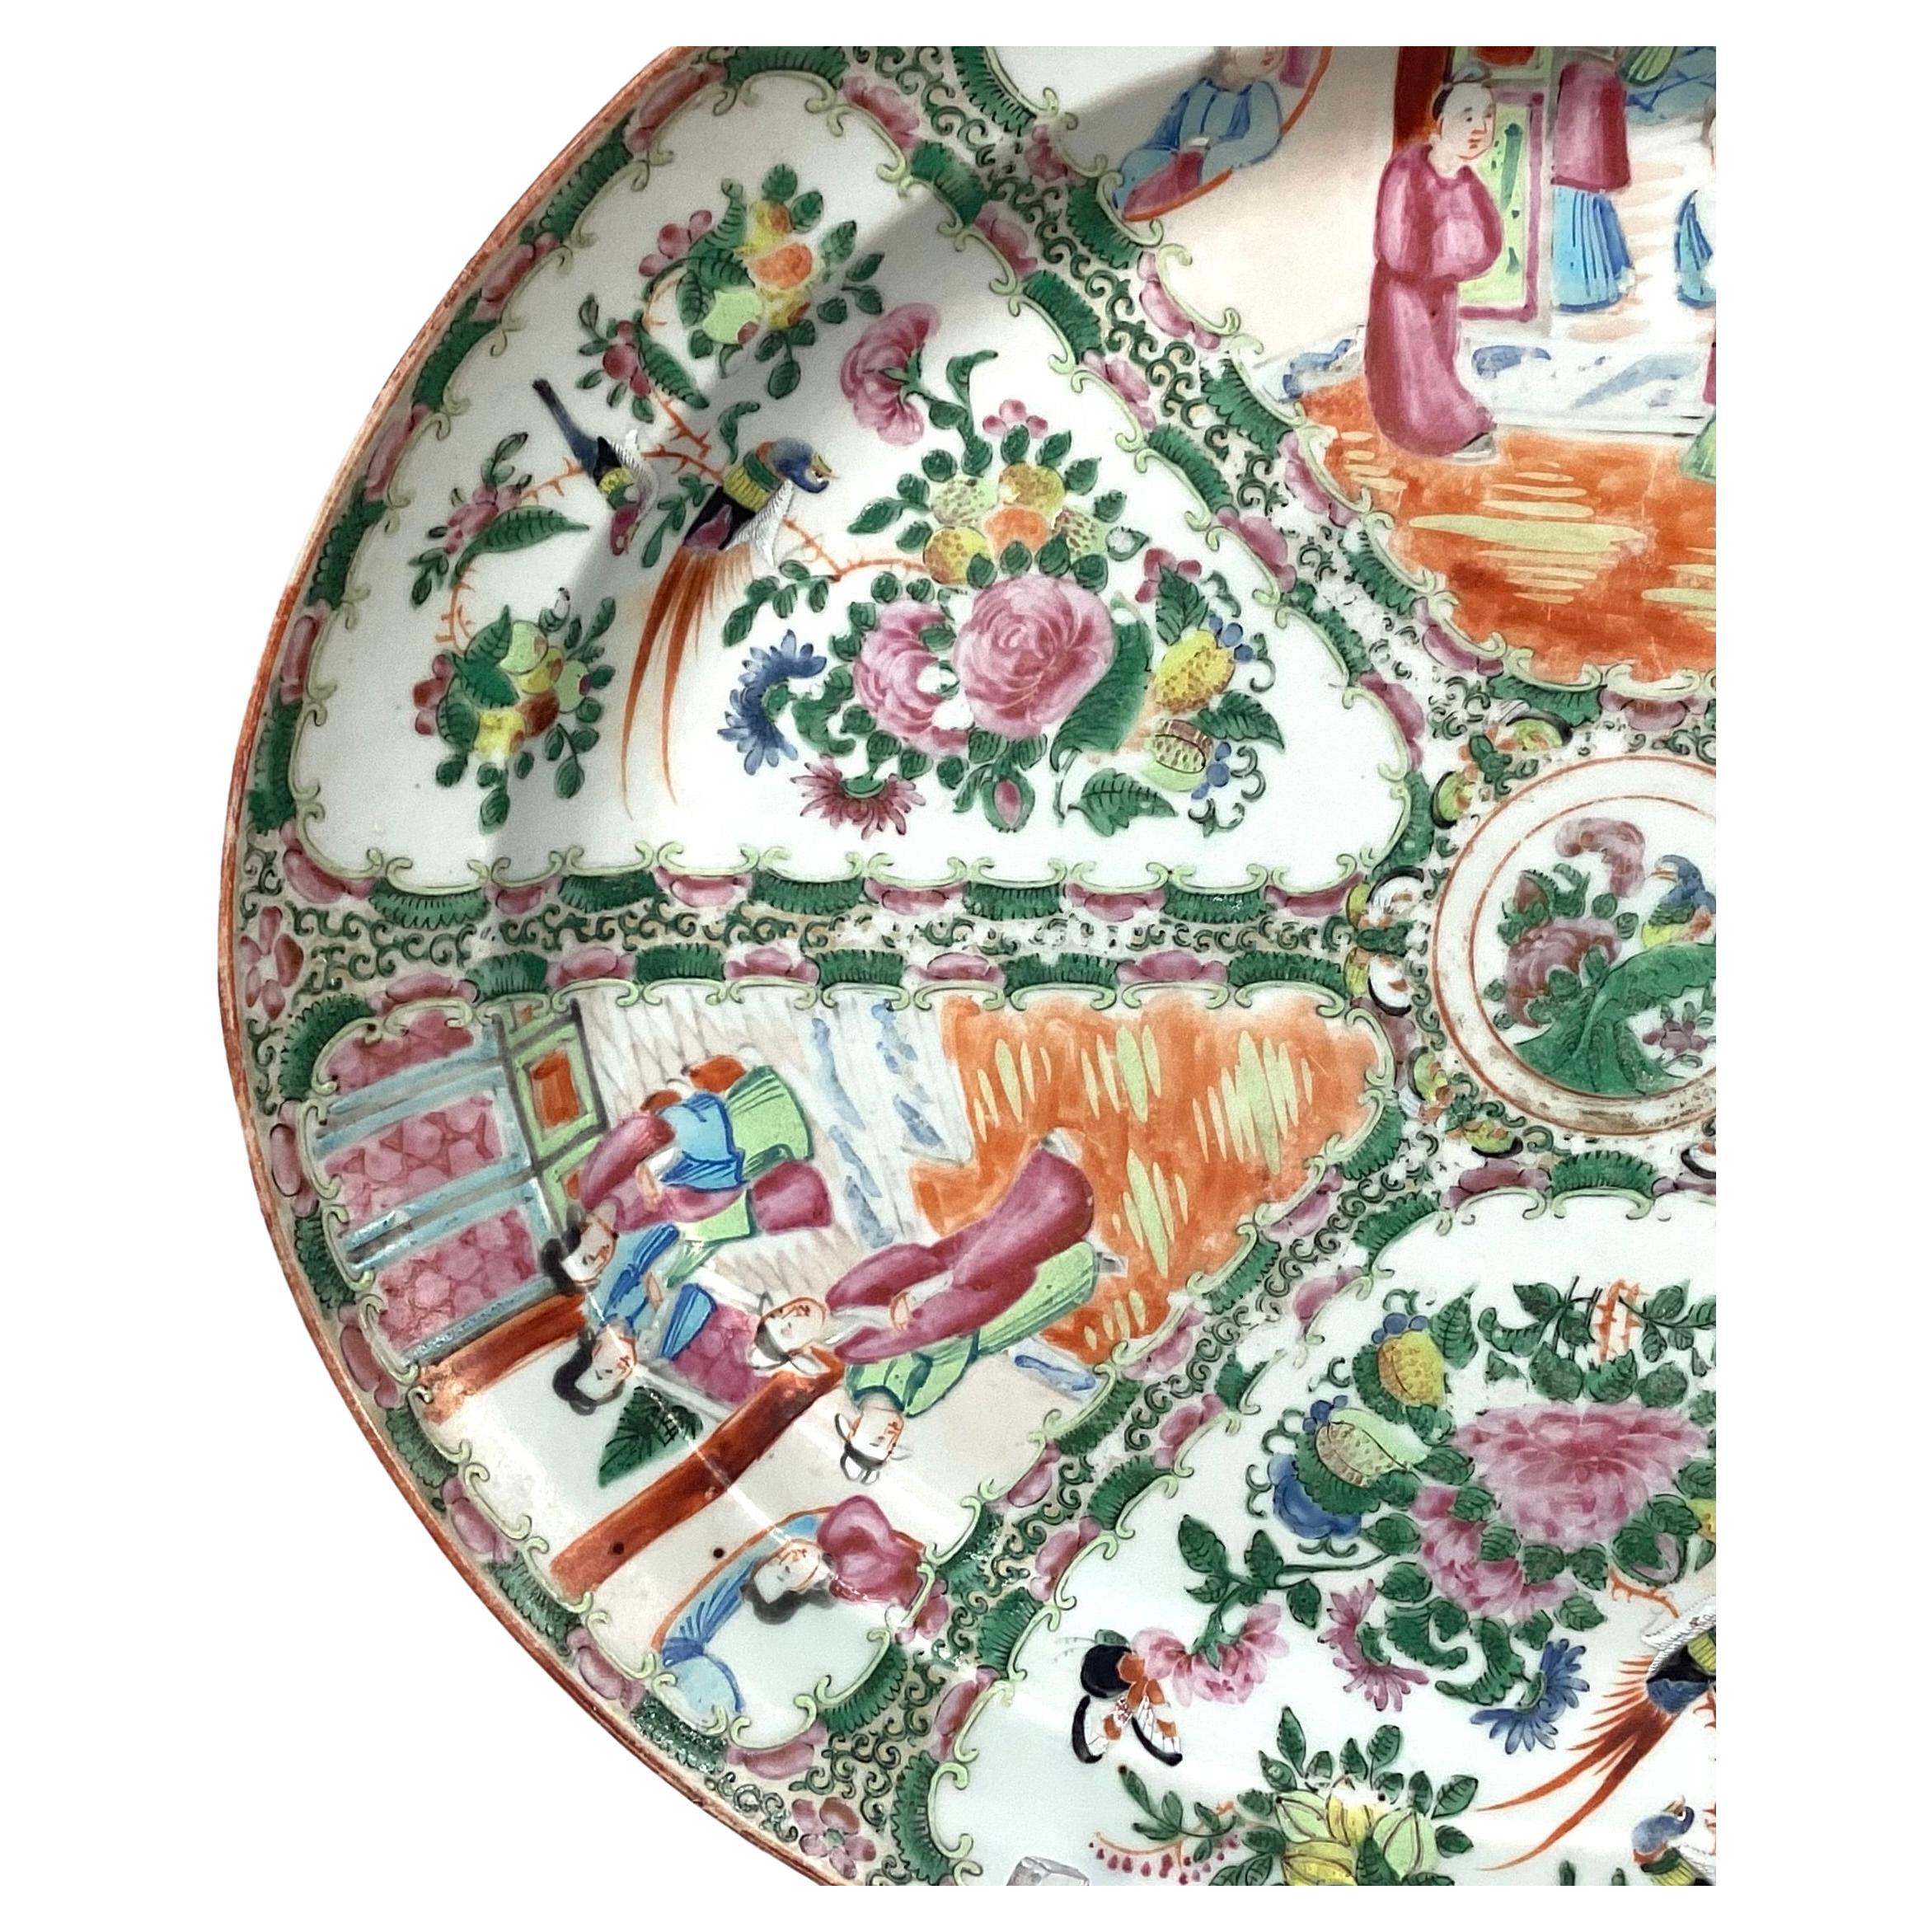 Extra large 18 inch Qing Dynasty Famille Rose Medallion platter, Canton c. 1870, polychrome enameled glazes on a hard-paste porcelain body, with 'orange peel' or ju-pi texture, the center medallion with a single multi-colored bird in a floral garden